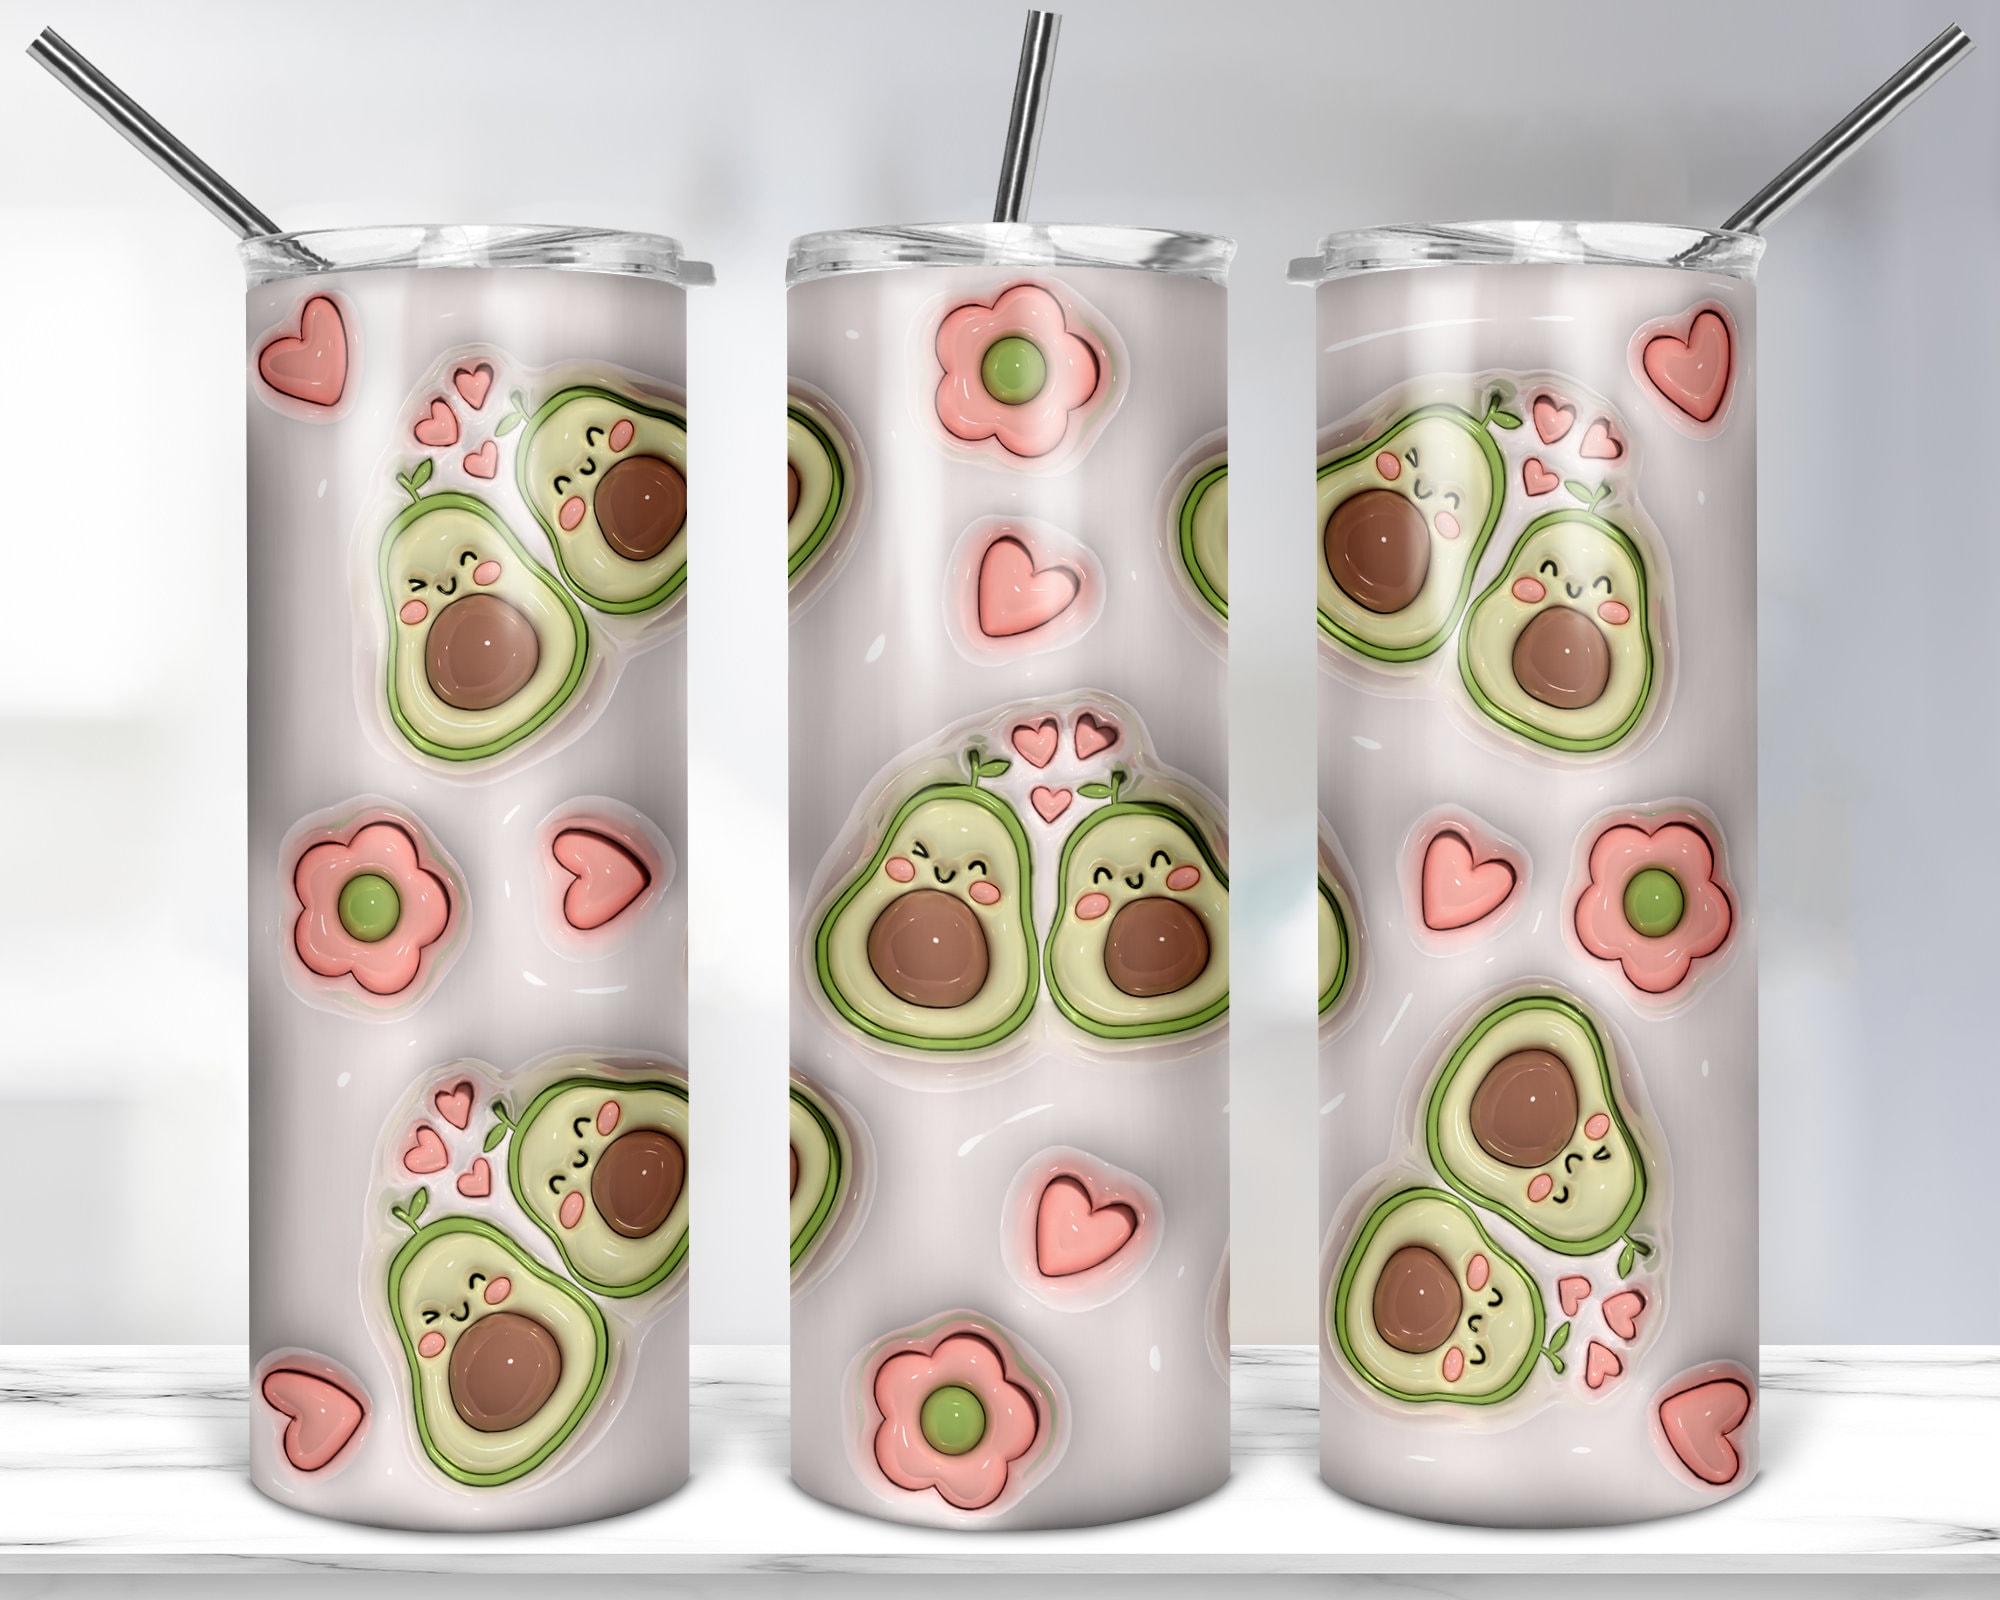 Beauty Comes In All Shapes & Sizes [Avocado] - Tumbler Cup